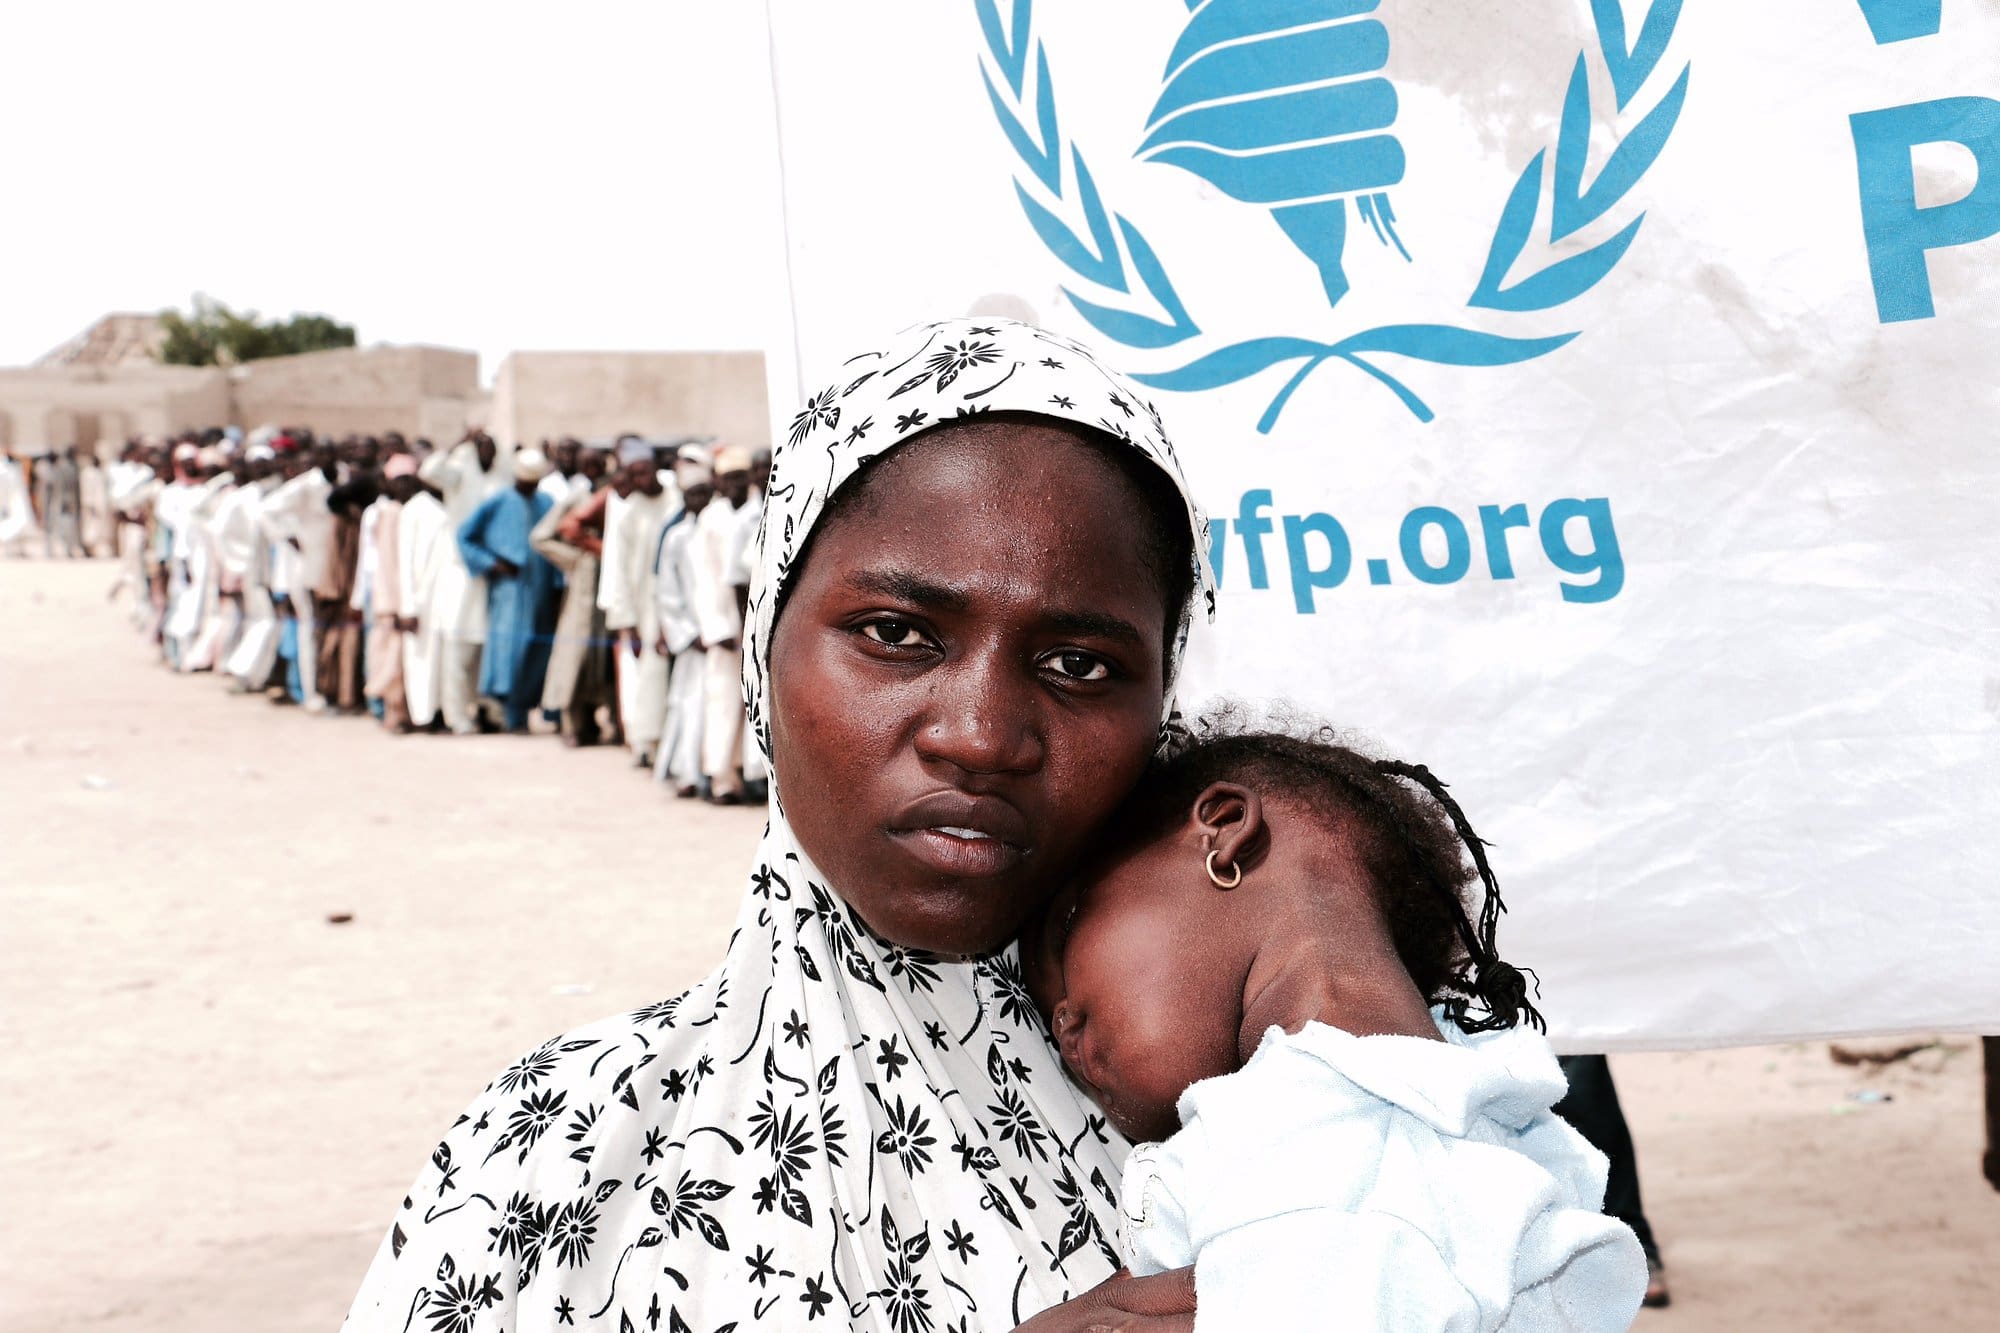 This mother in Maiduguri, Nigeria is among tens of thousands of displaced people who rely on monthly cash assistance of roughly $12 per month from WFP to feed her child.